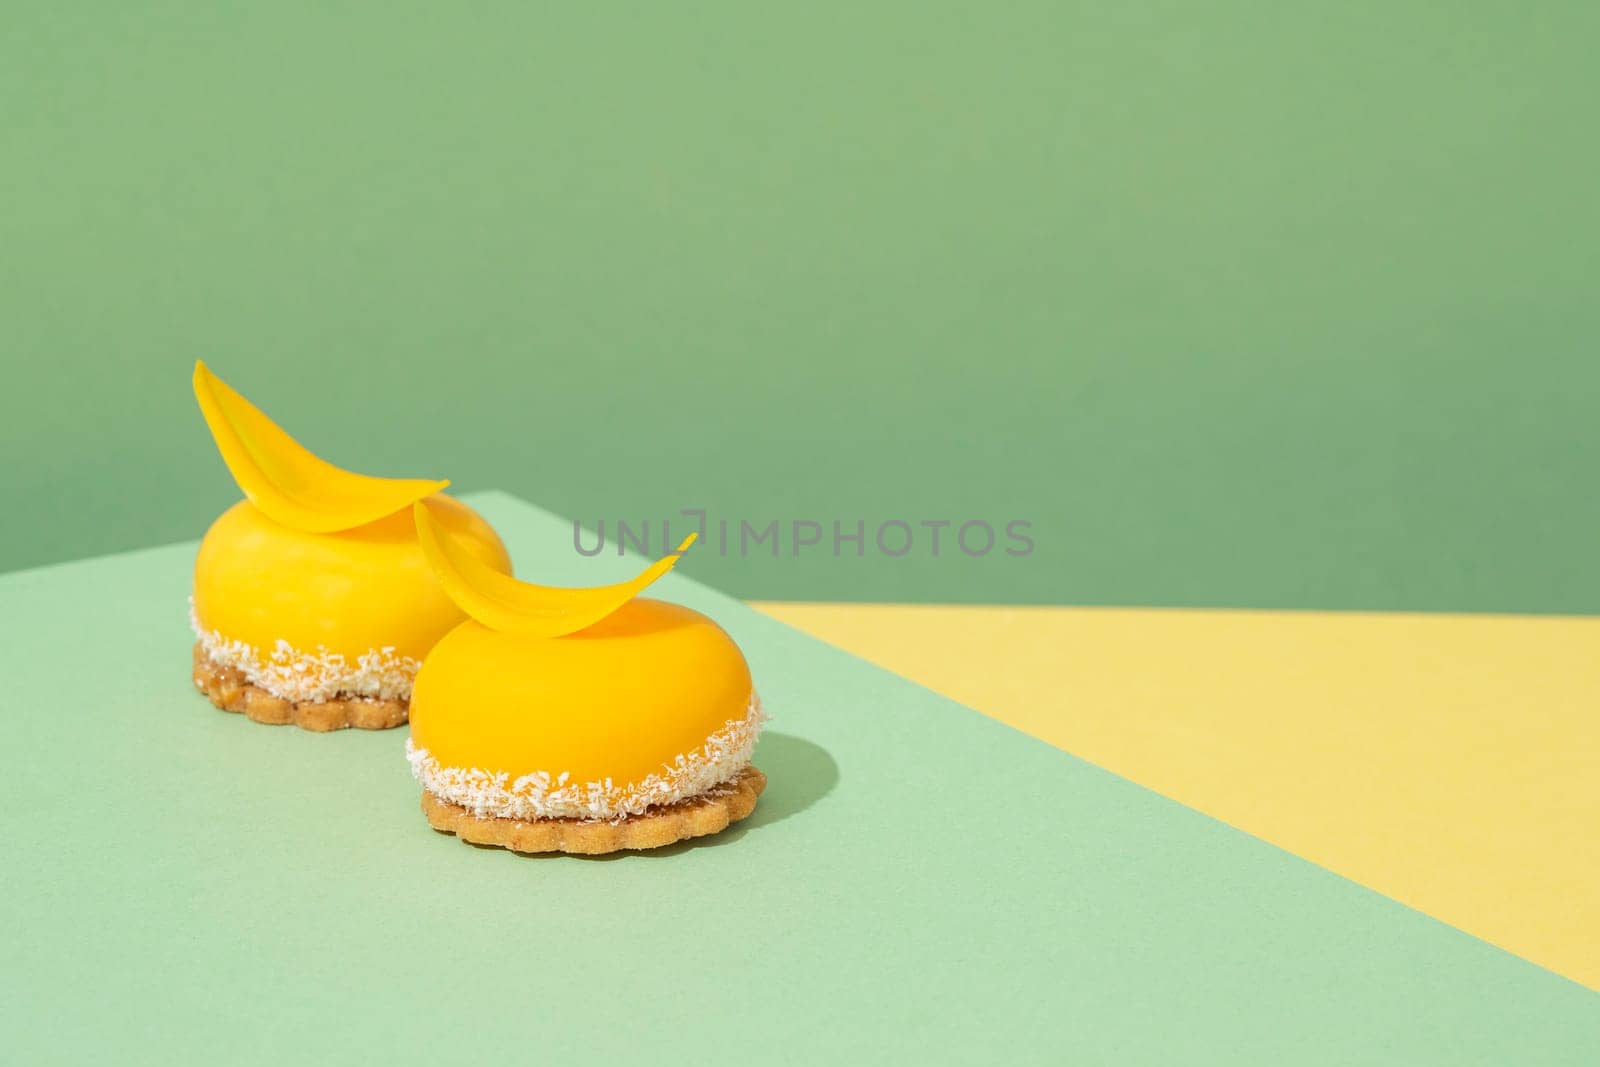 Two miniature, yellow-colored sweet treats set atop a blue and yellow-patterned tabletop by A_Karim